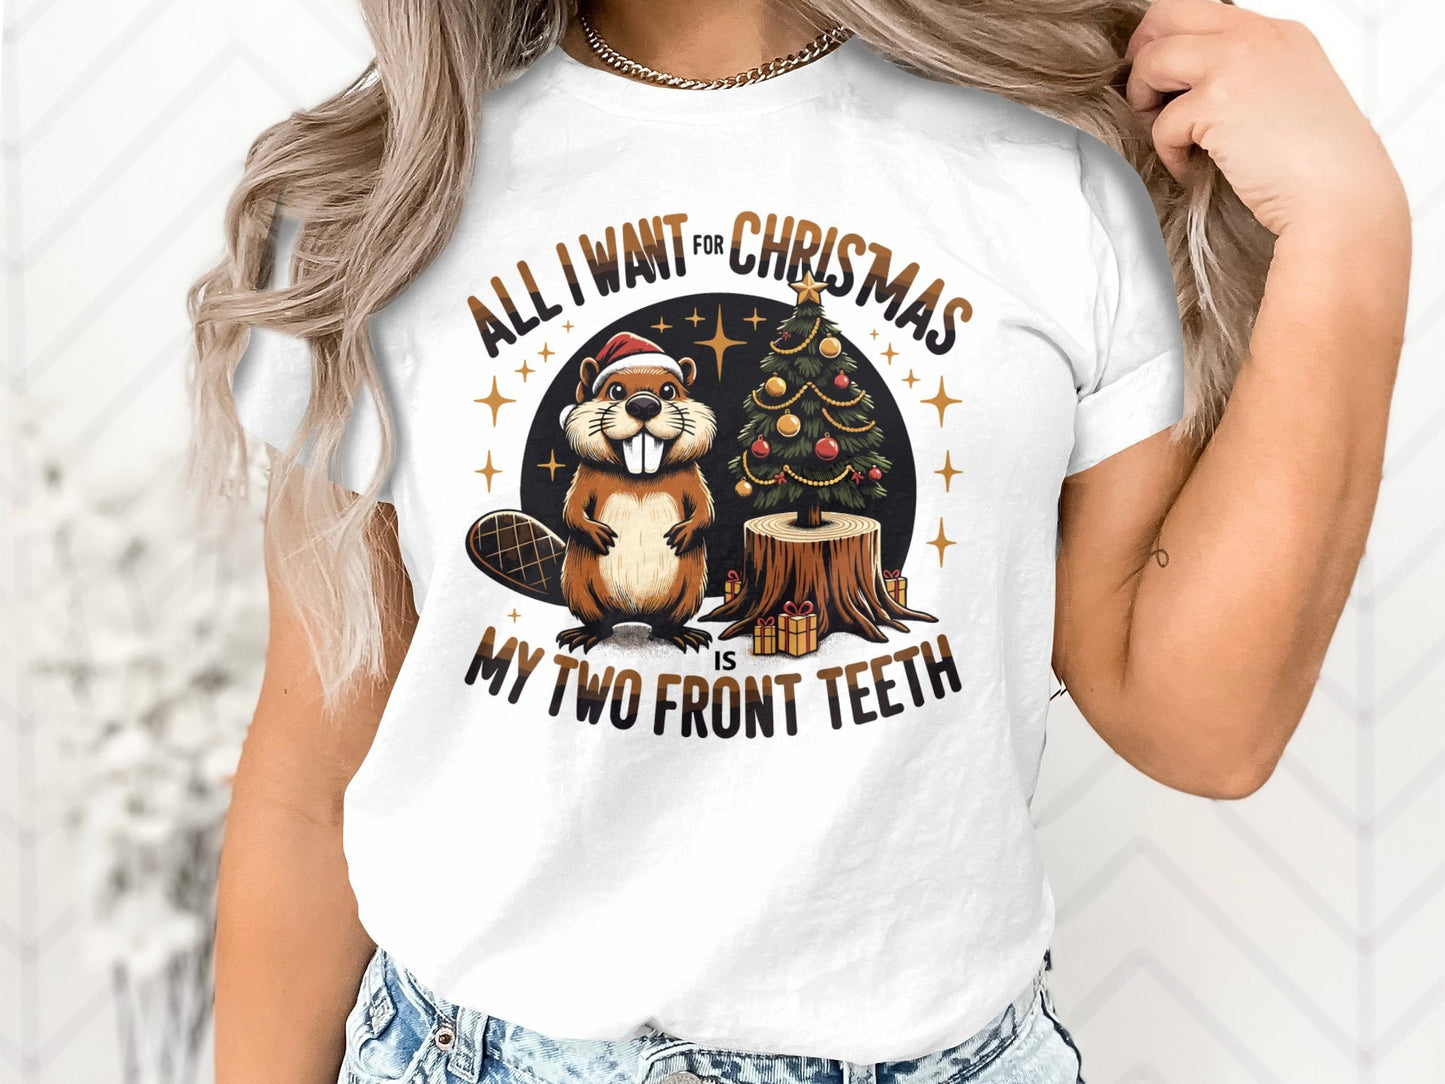 Funny Beaver Christmas Shirt - All I Want for Christmas Is My Two Front Teeth